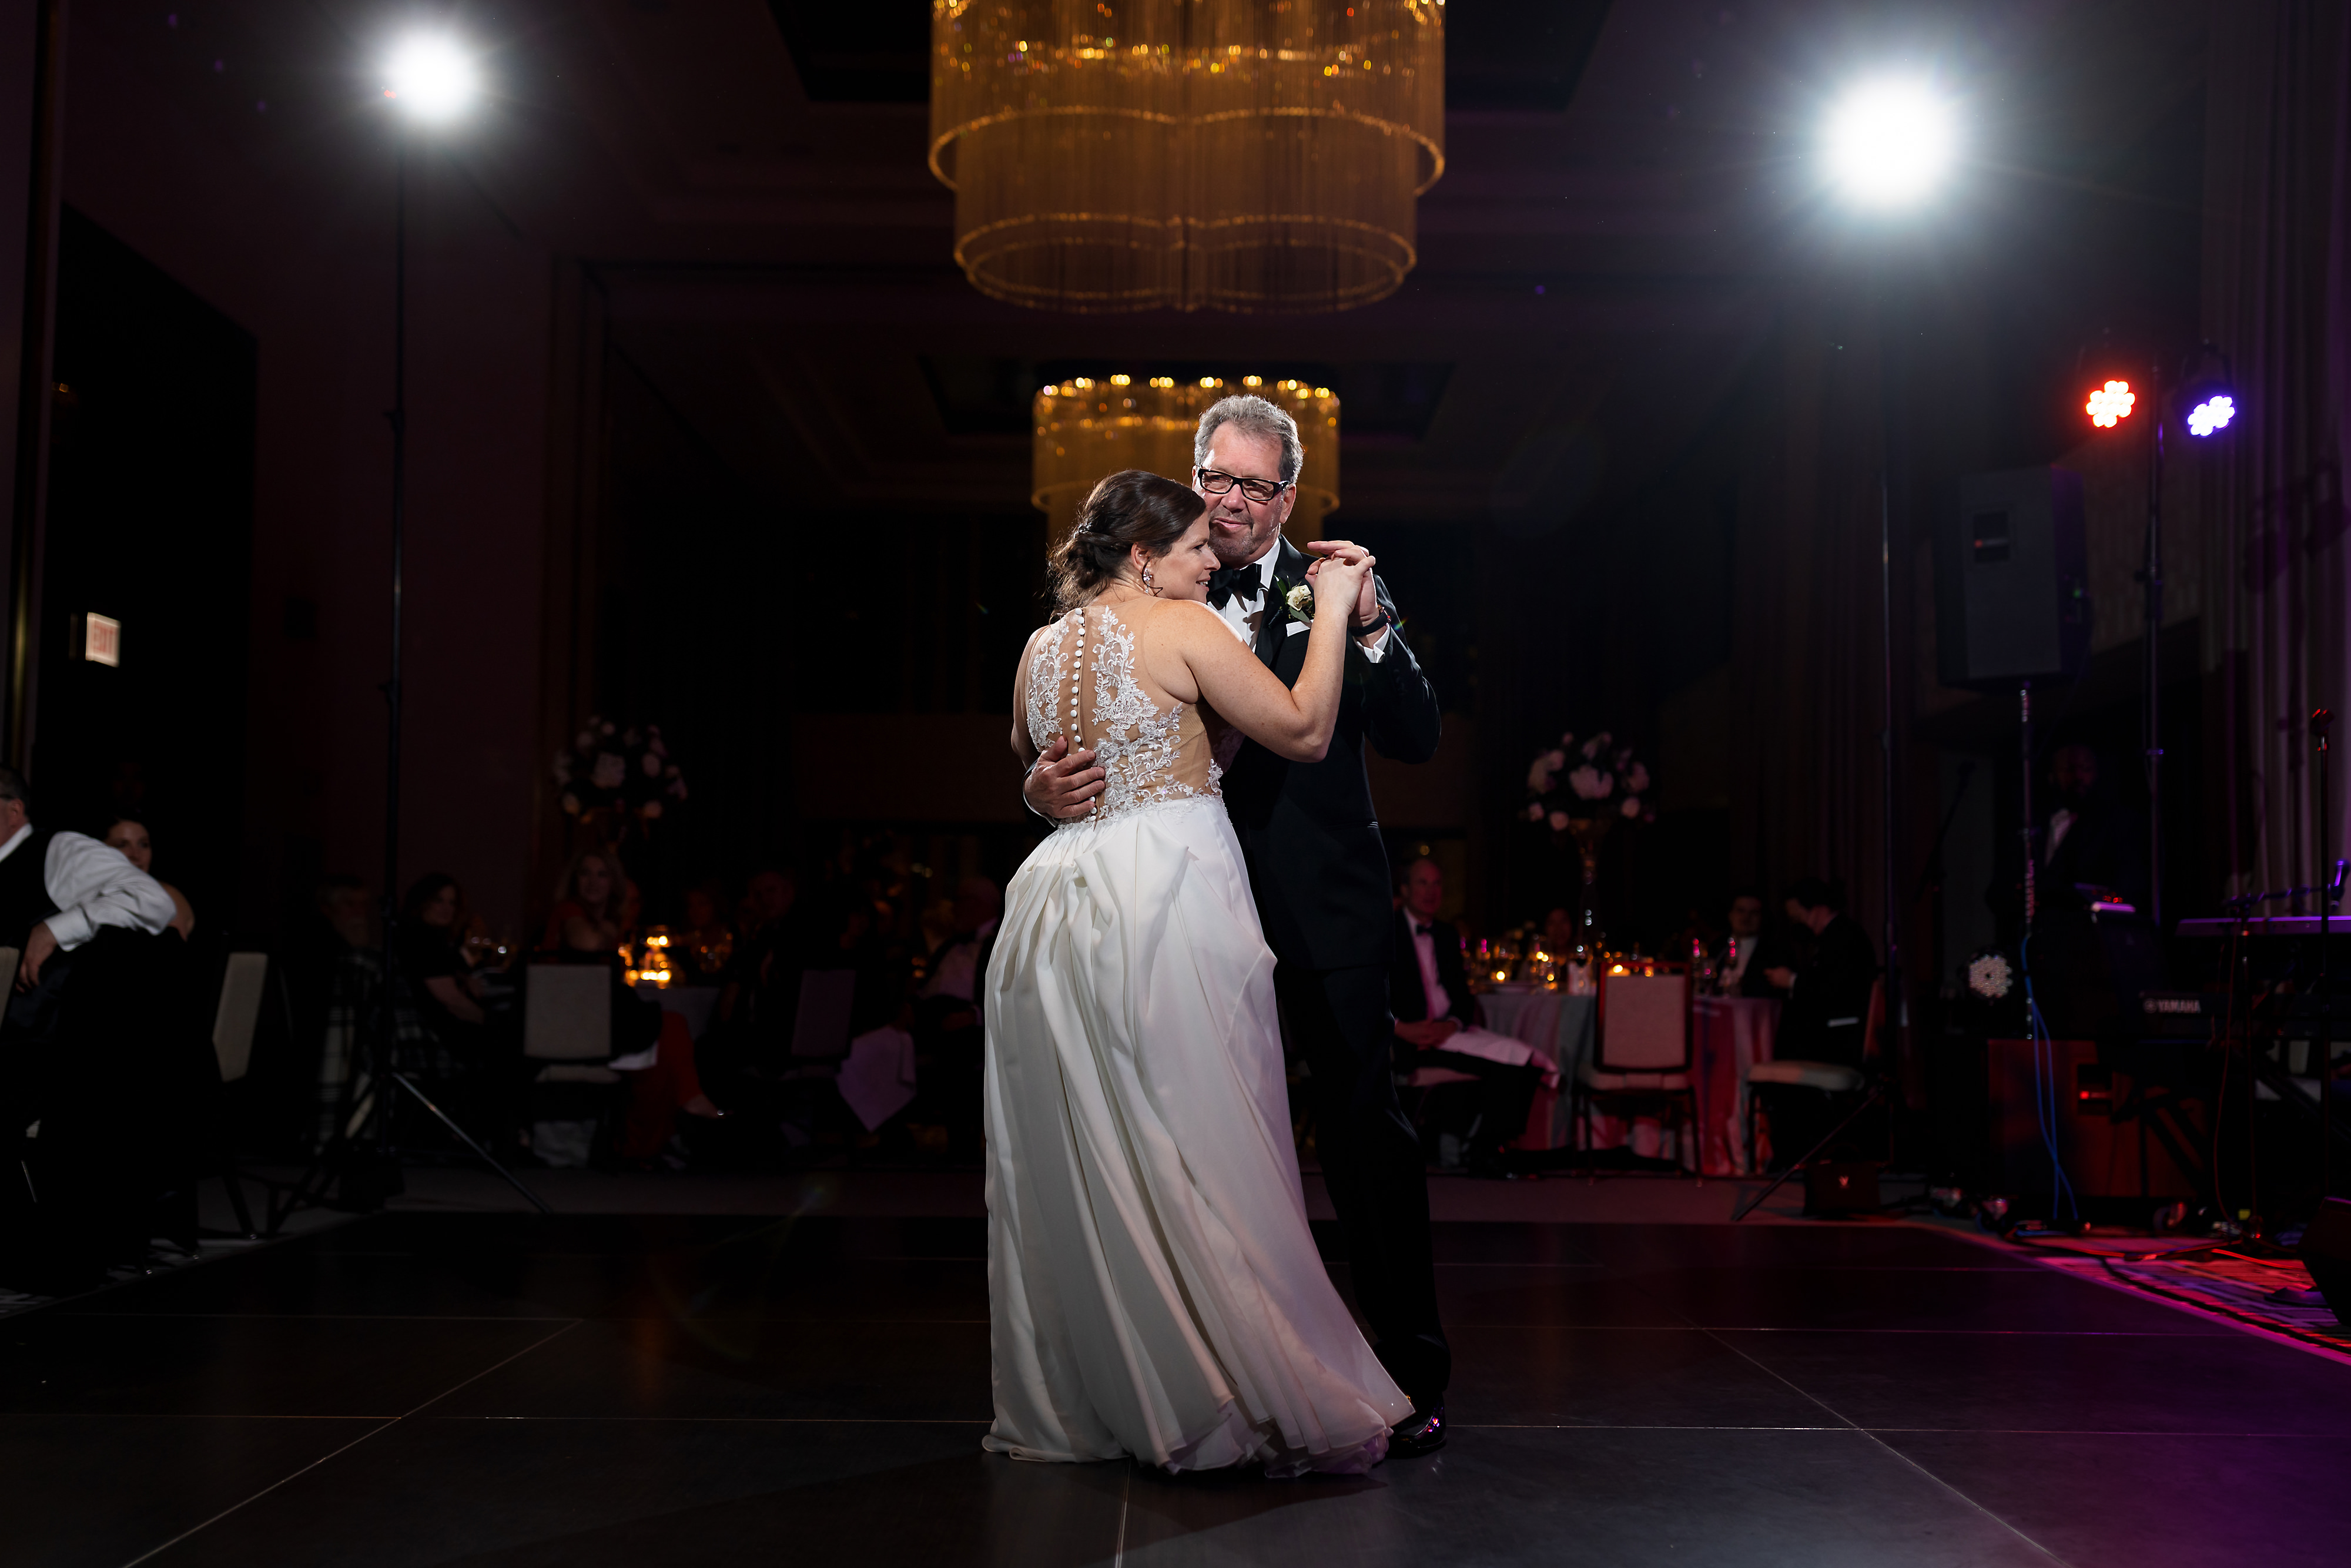 Bride and father share first dance during wedding reception at The Langham Hotel in downtown Chicago